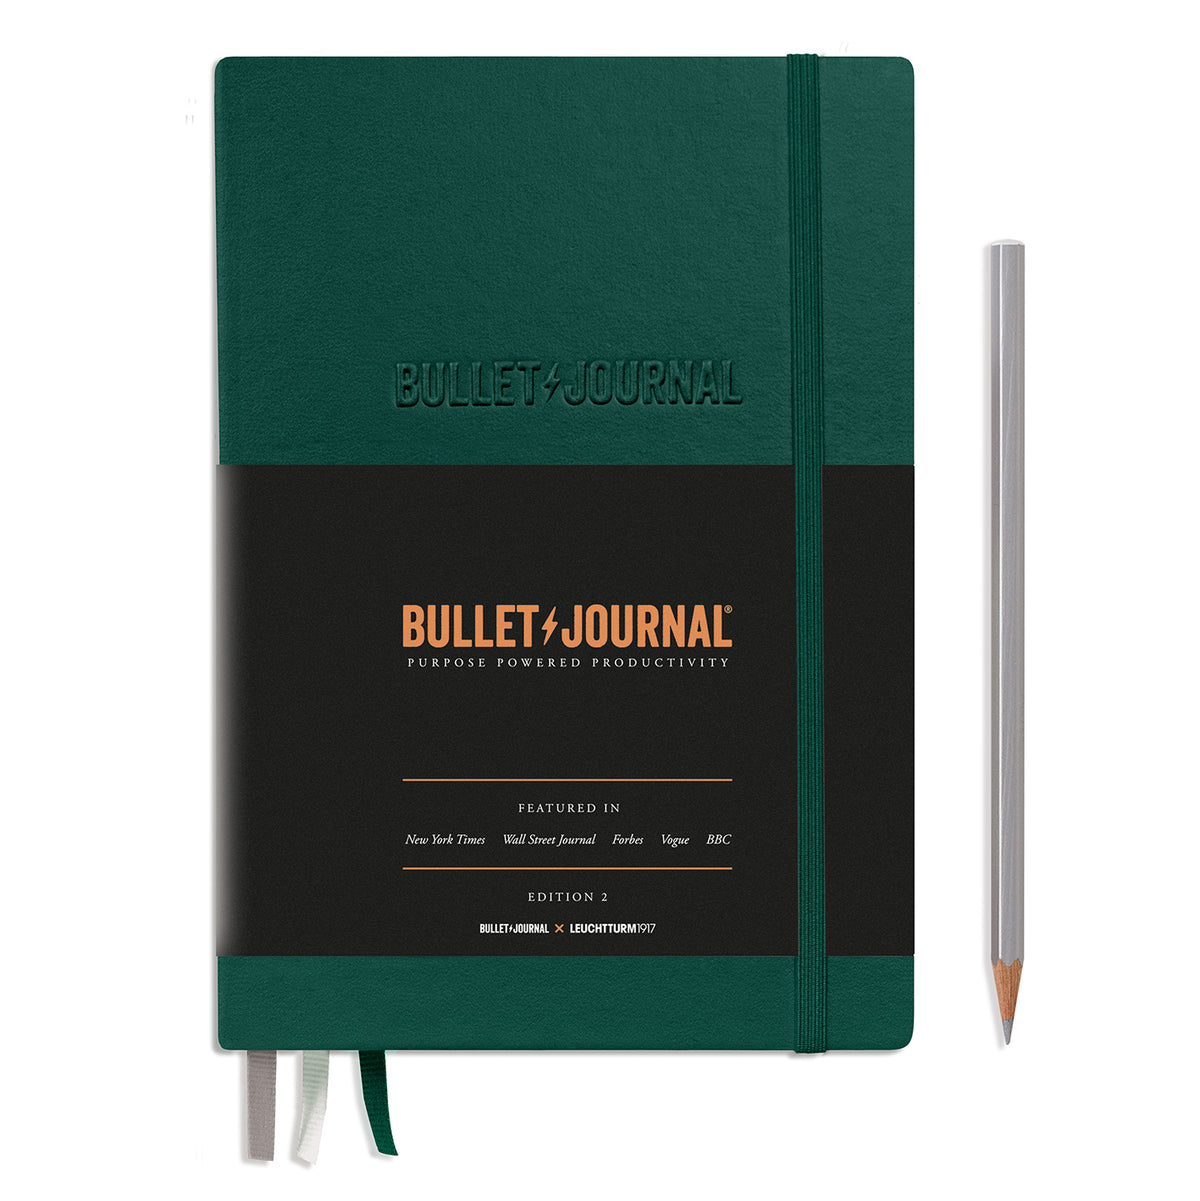 A racing green bullet journal notebook. It has an elastic band keeping it together and a black paper band covering three quarters of the book detailing that it&#39;s a bullet journal. Embossed on the front cover are the words in capitals BULLET JOURNAL.